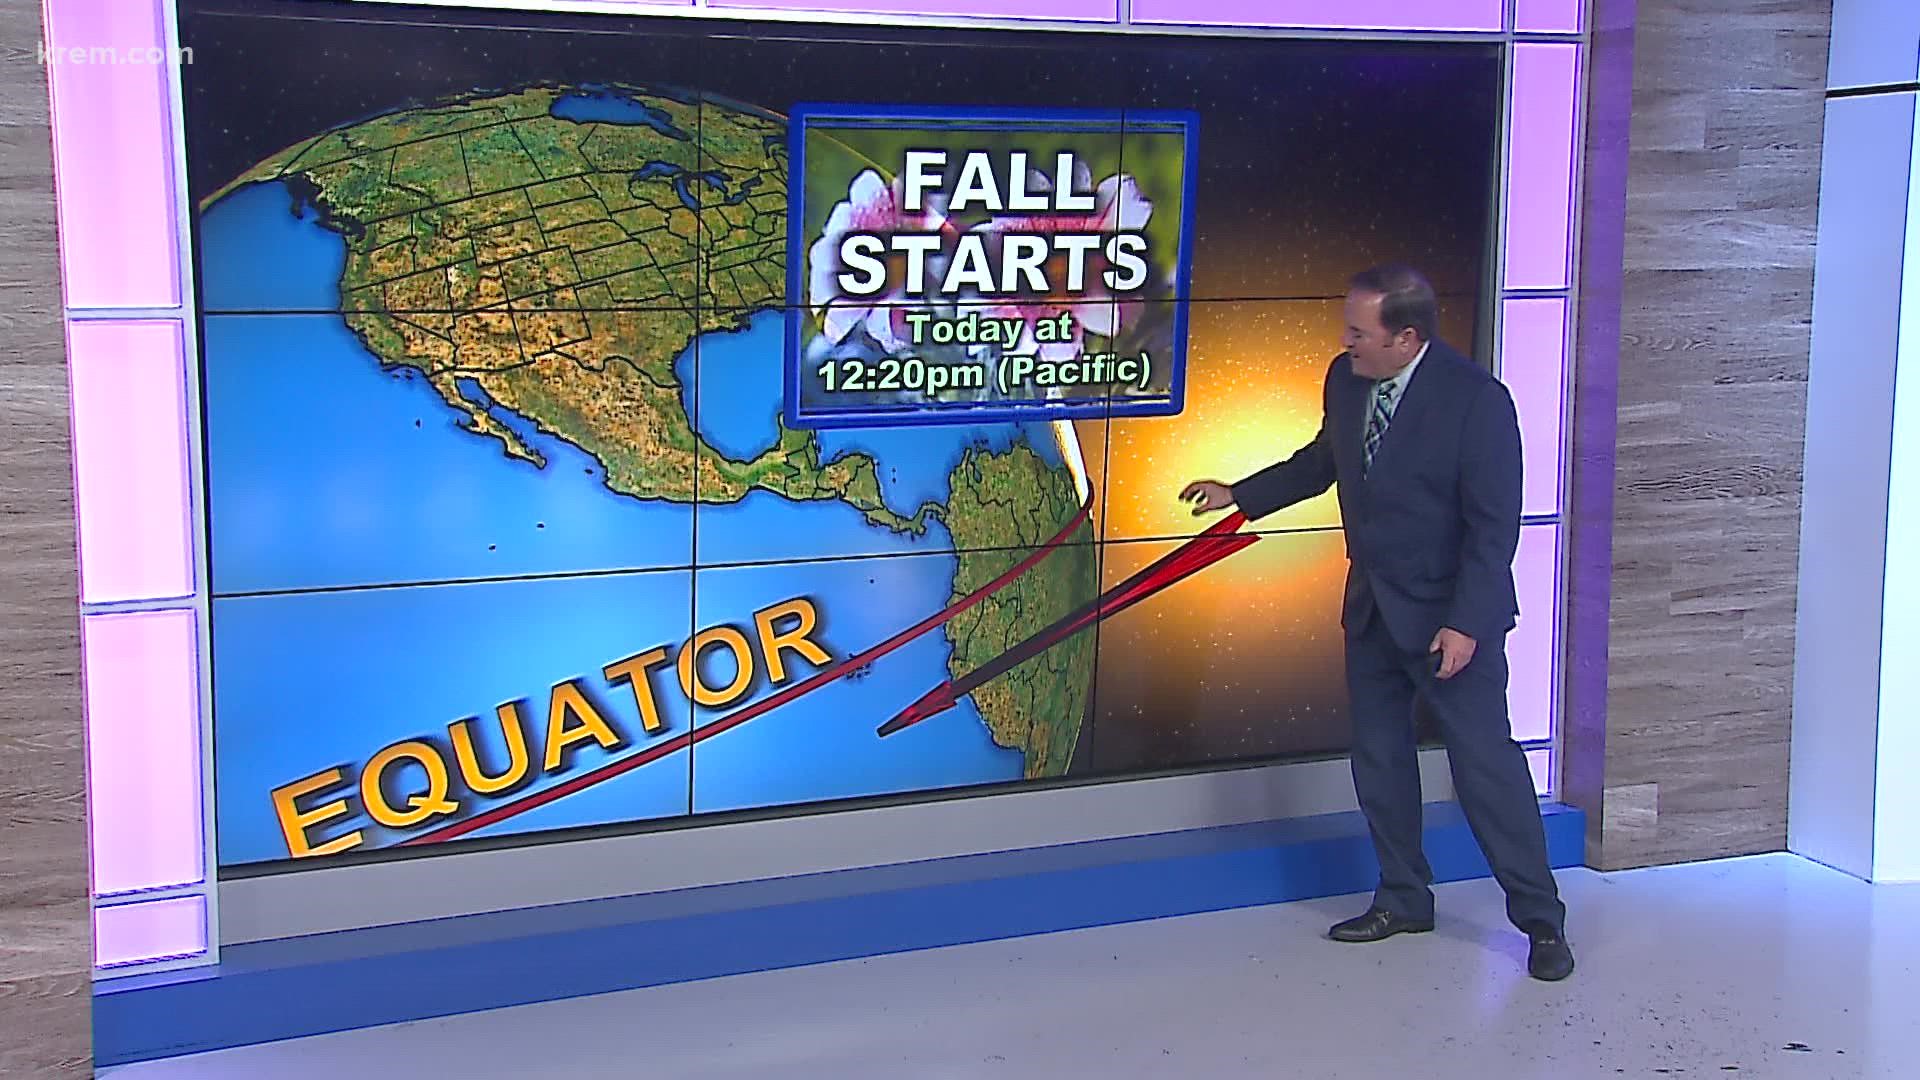 Sept. 22 is the first day off fall, the Autumn Equator, which means day light will be shorter.